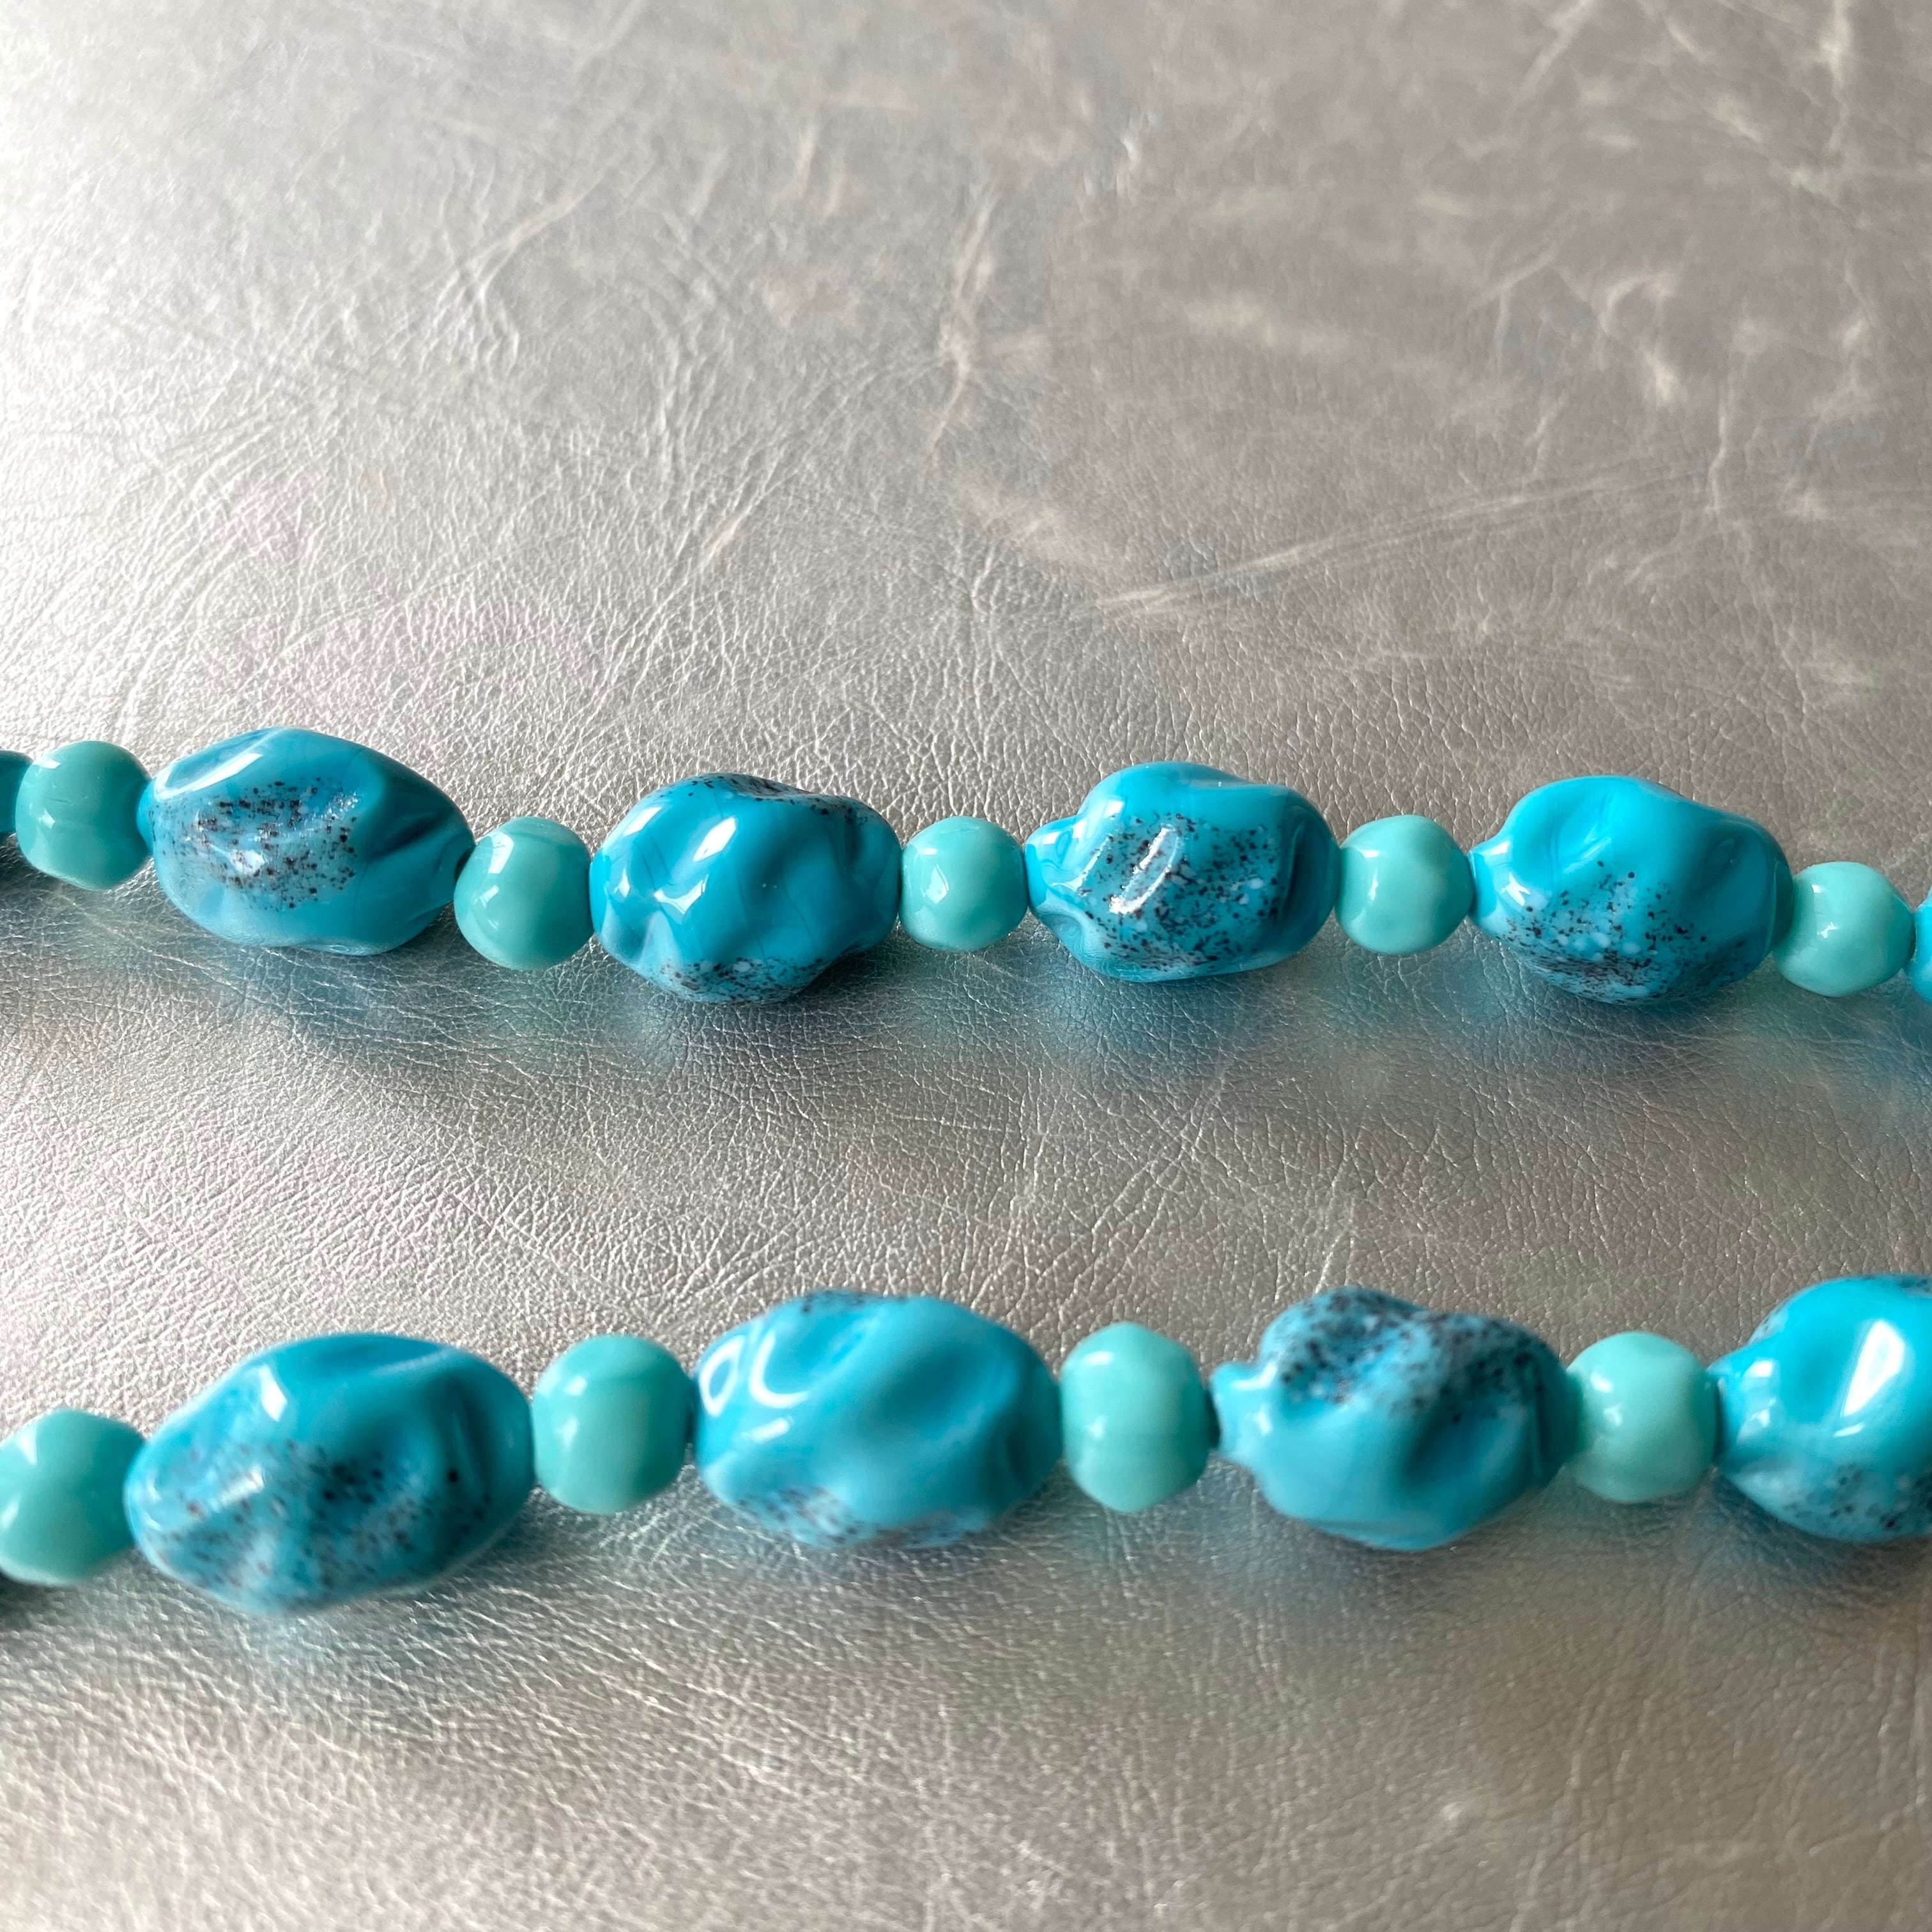 Vintage 80s retro turquoise blue glass beads necklace レトロ